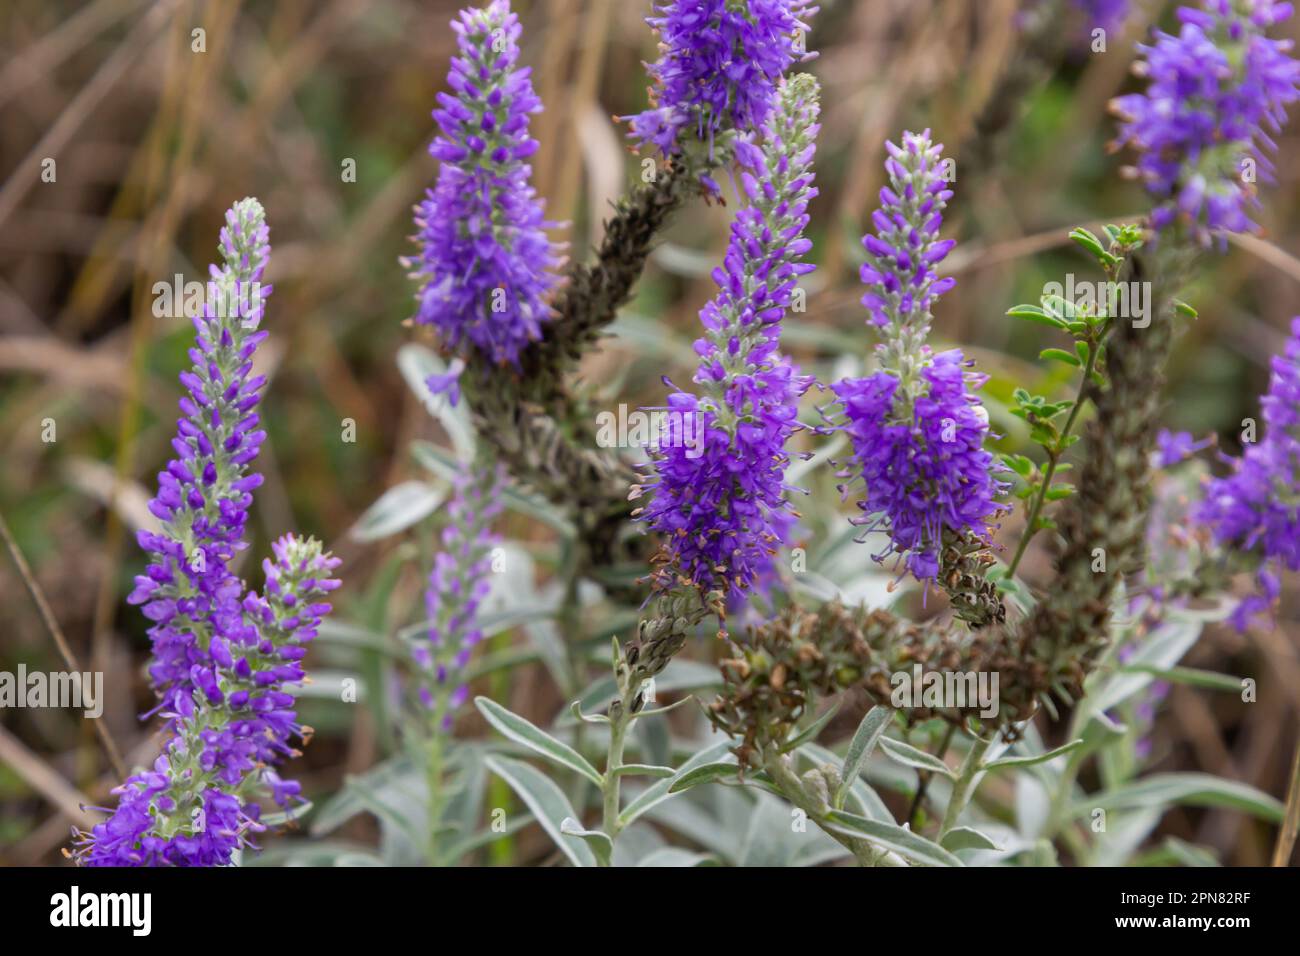 Blue Spike speedwell, Veronica spicata, blooming in a dunny garden in June, closeup with selective focus. Stock Photo